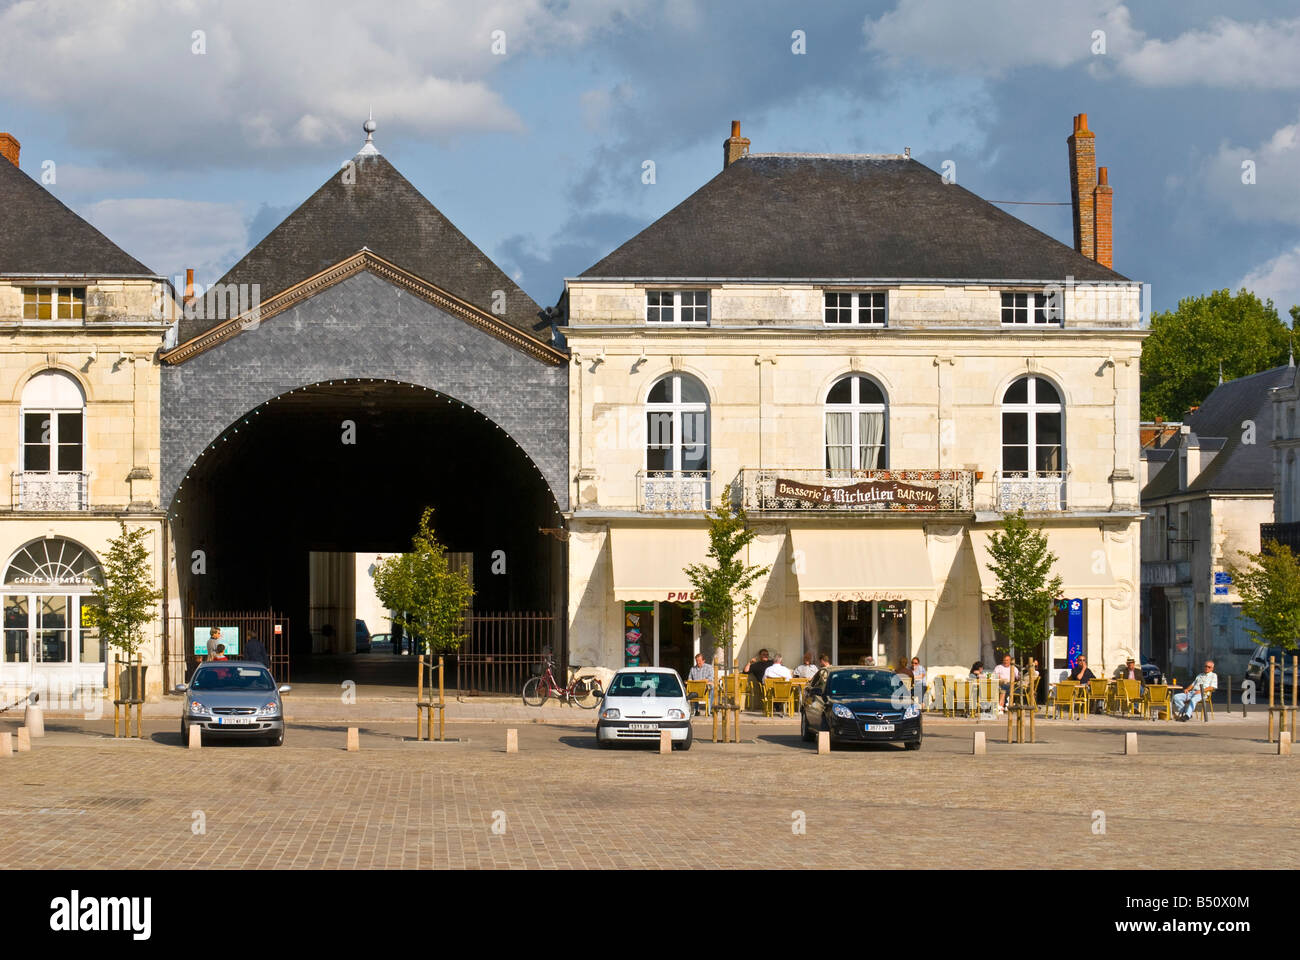 Town square and Market Hall, Richelieu, Indre-et-Loire, France. Stock Photo